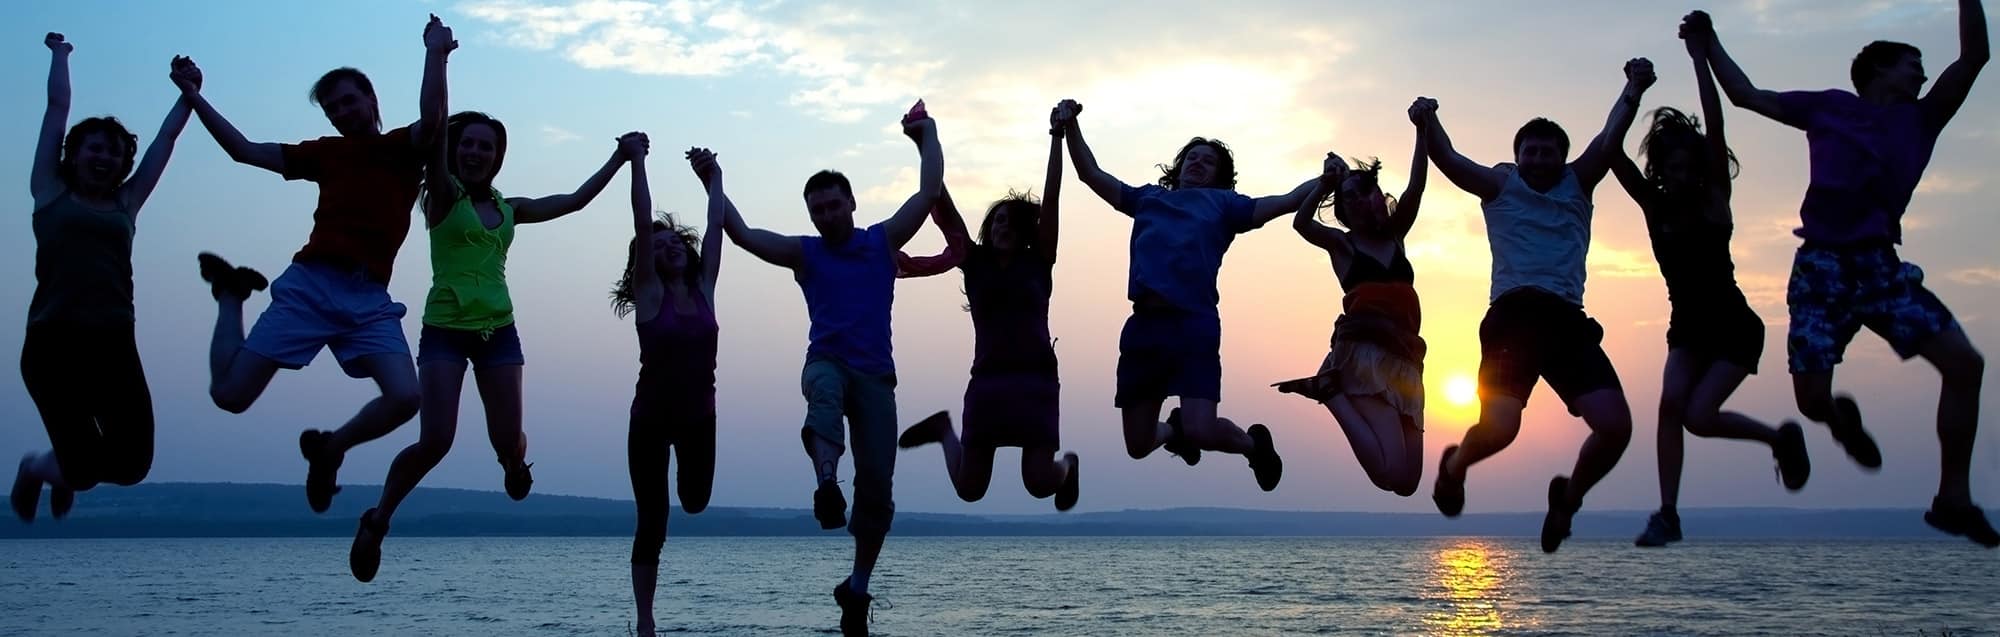 Large group of young adults holding hands and jumping in the air with the ocean behind them and the sun setting